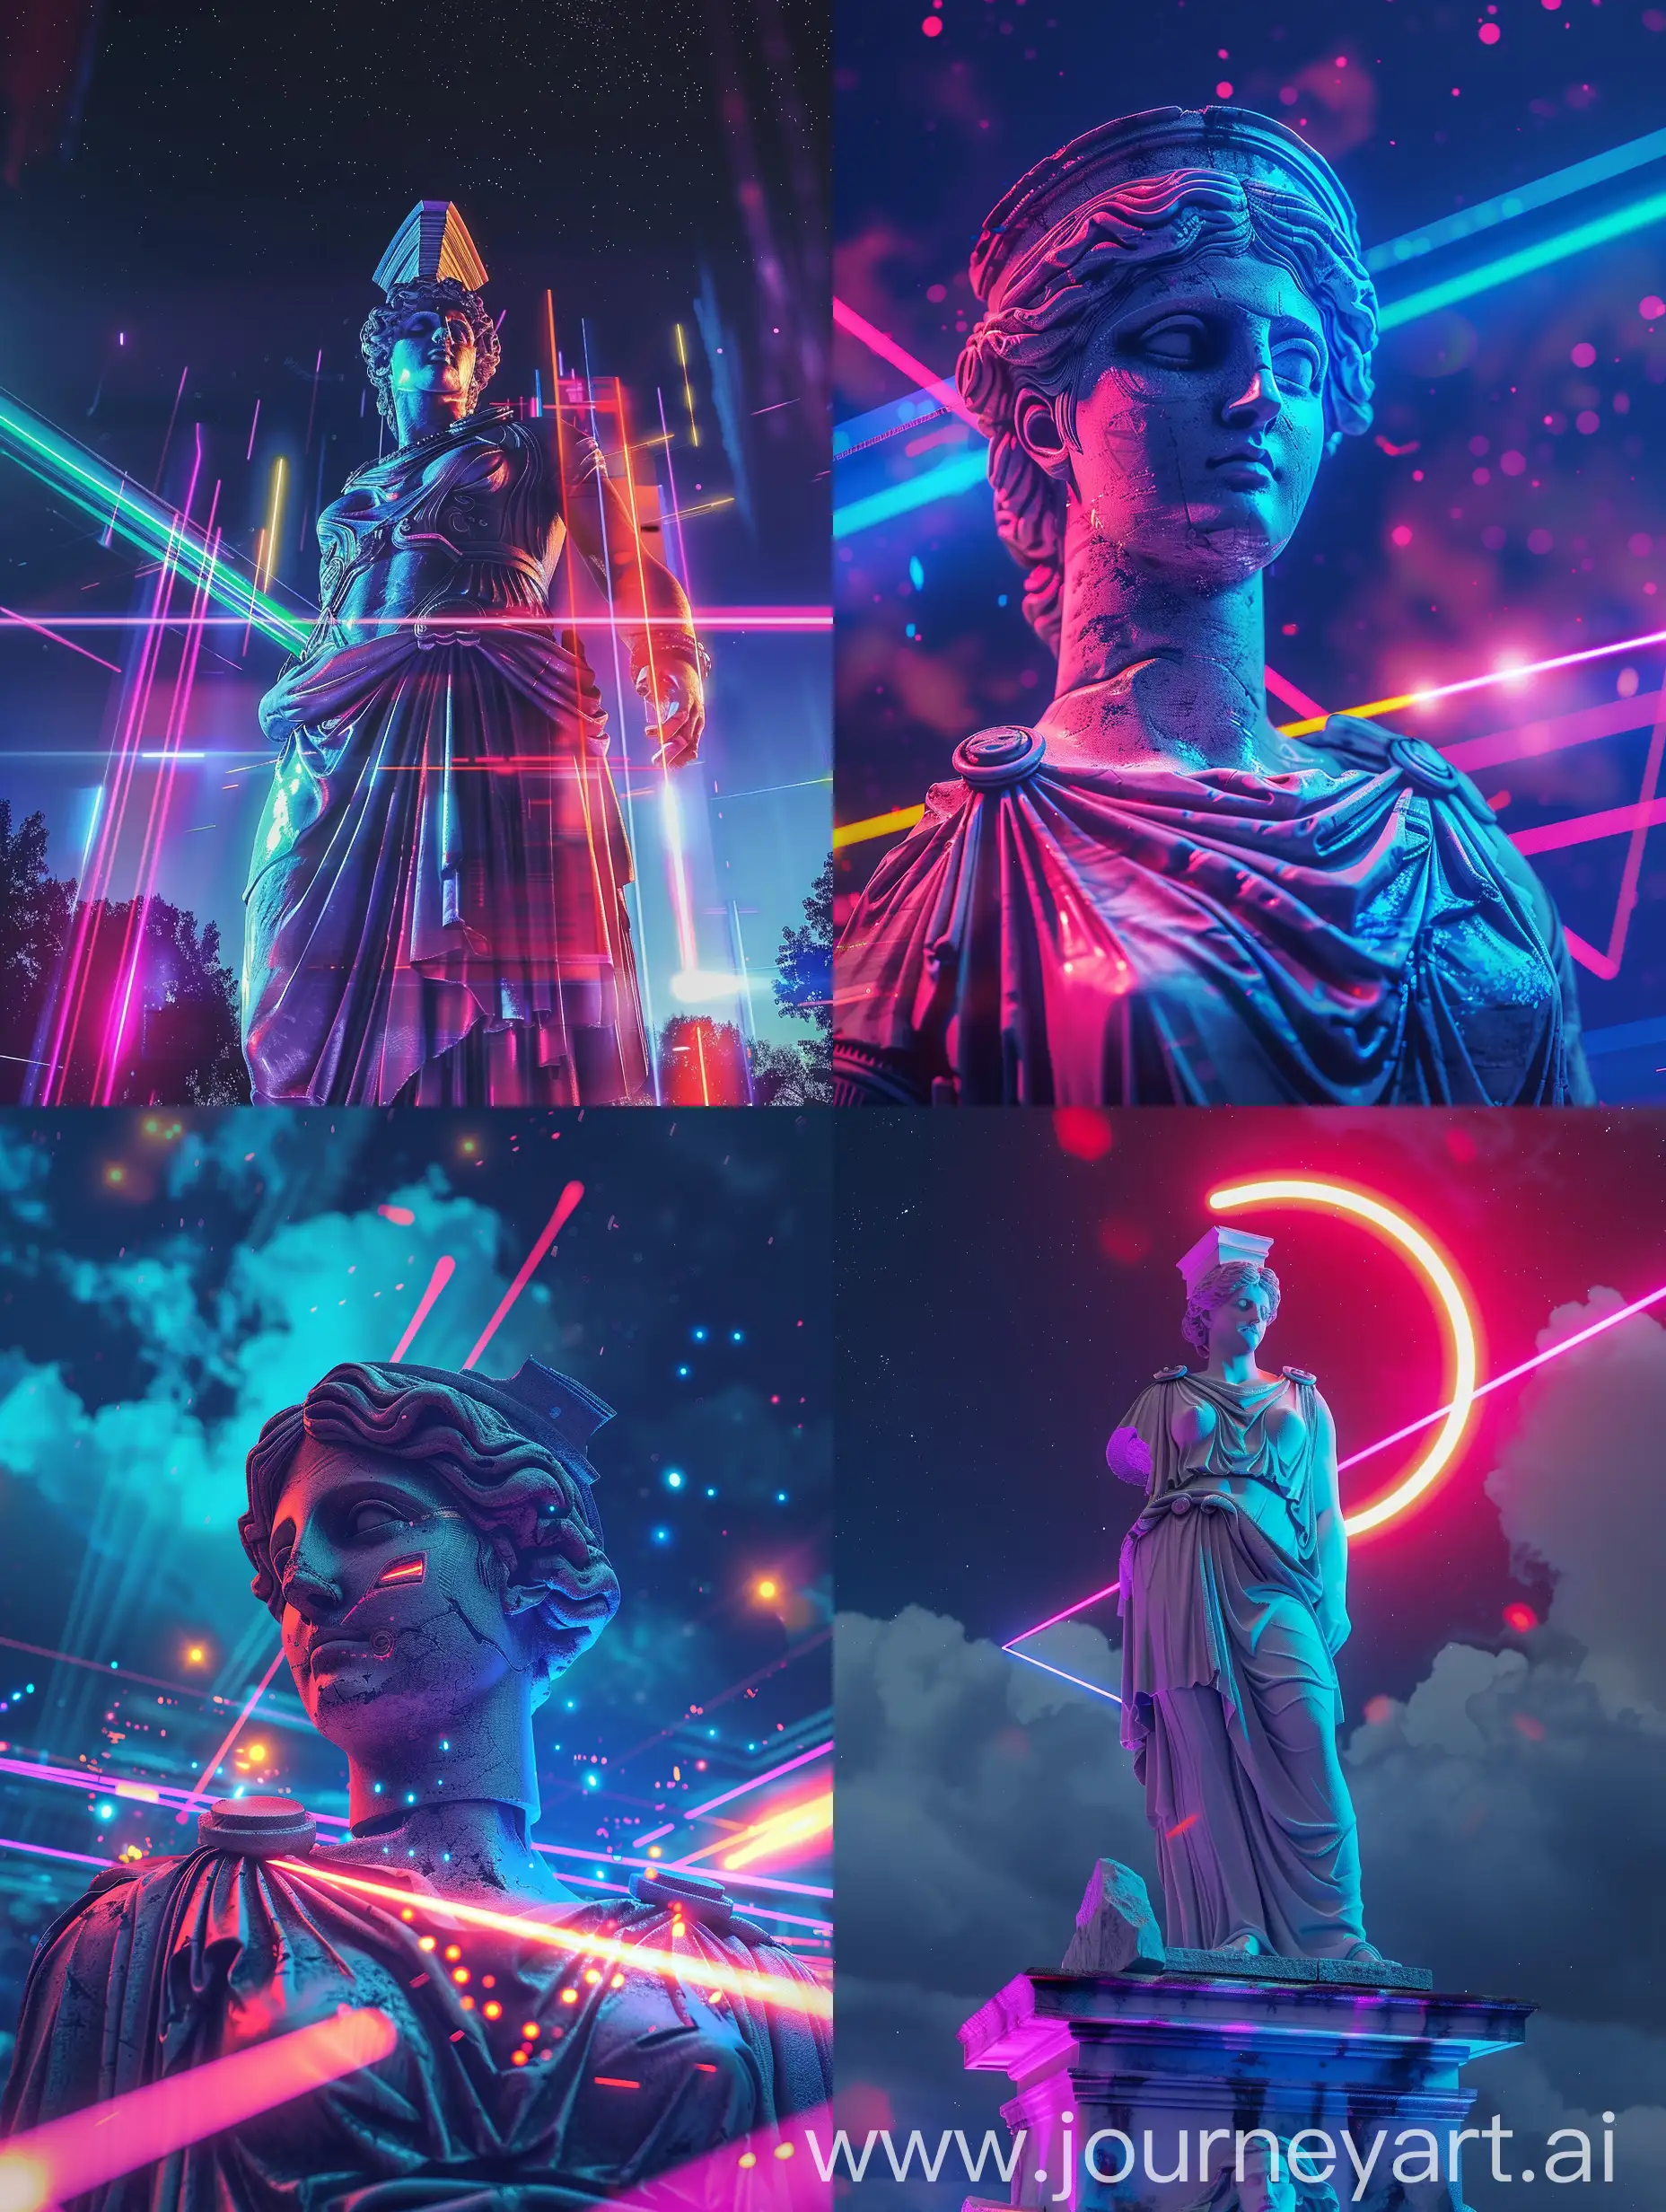 Futuristic-Cyberpunk-Synthwave-Greek-Statue-Illuminated-by-Colorful-SciFi-Lights-at-Night